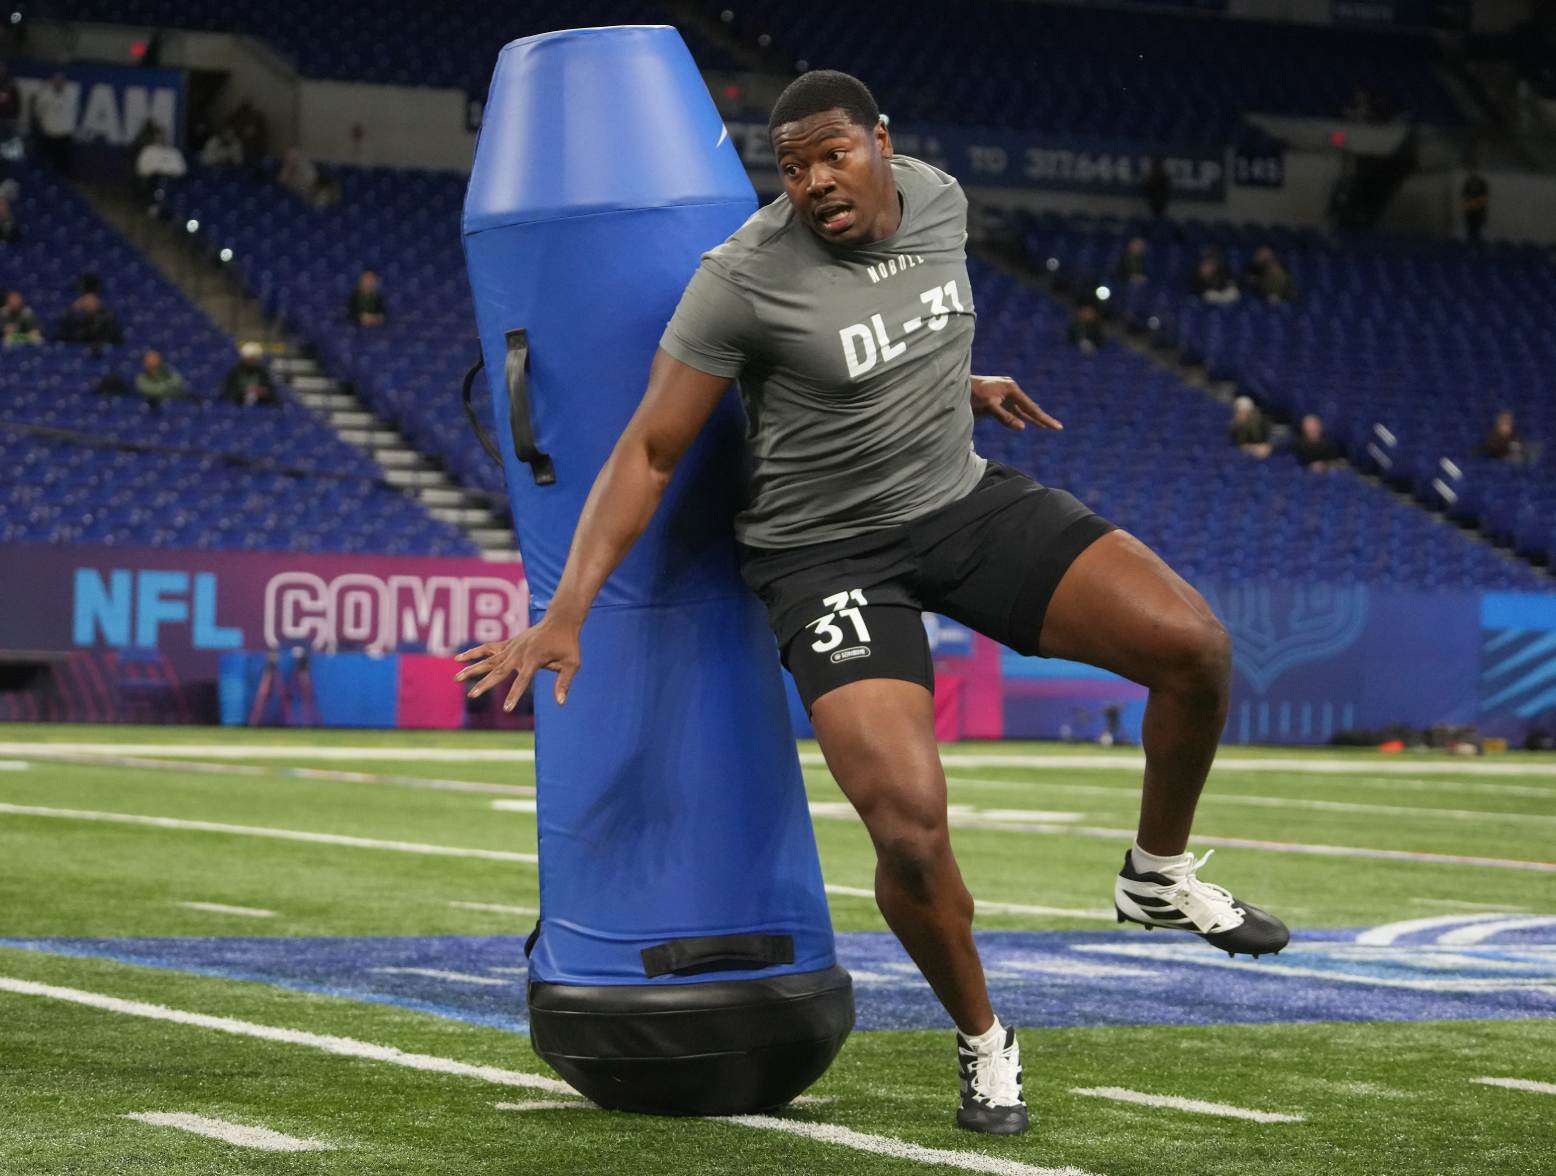 Feb 29, 2024; Indianapolis, IN, USA; Texas Tech defensive lineman Myles Cole (DL31) works out during the 2024 NFL Combine at Lucas Oil Stadium. Credit: Kirby Lee-USA TODAY Sports